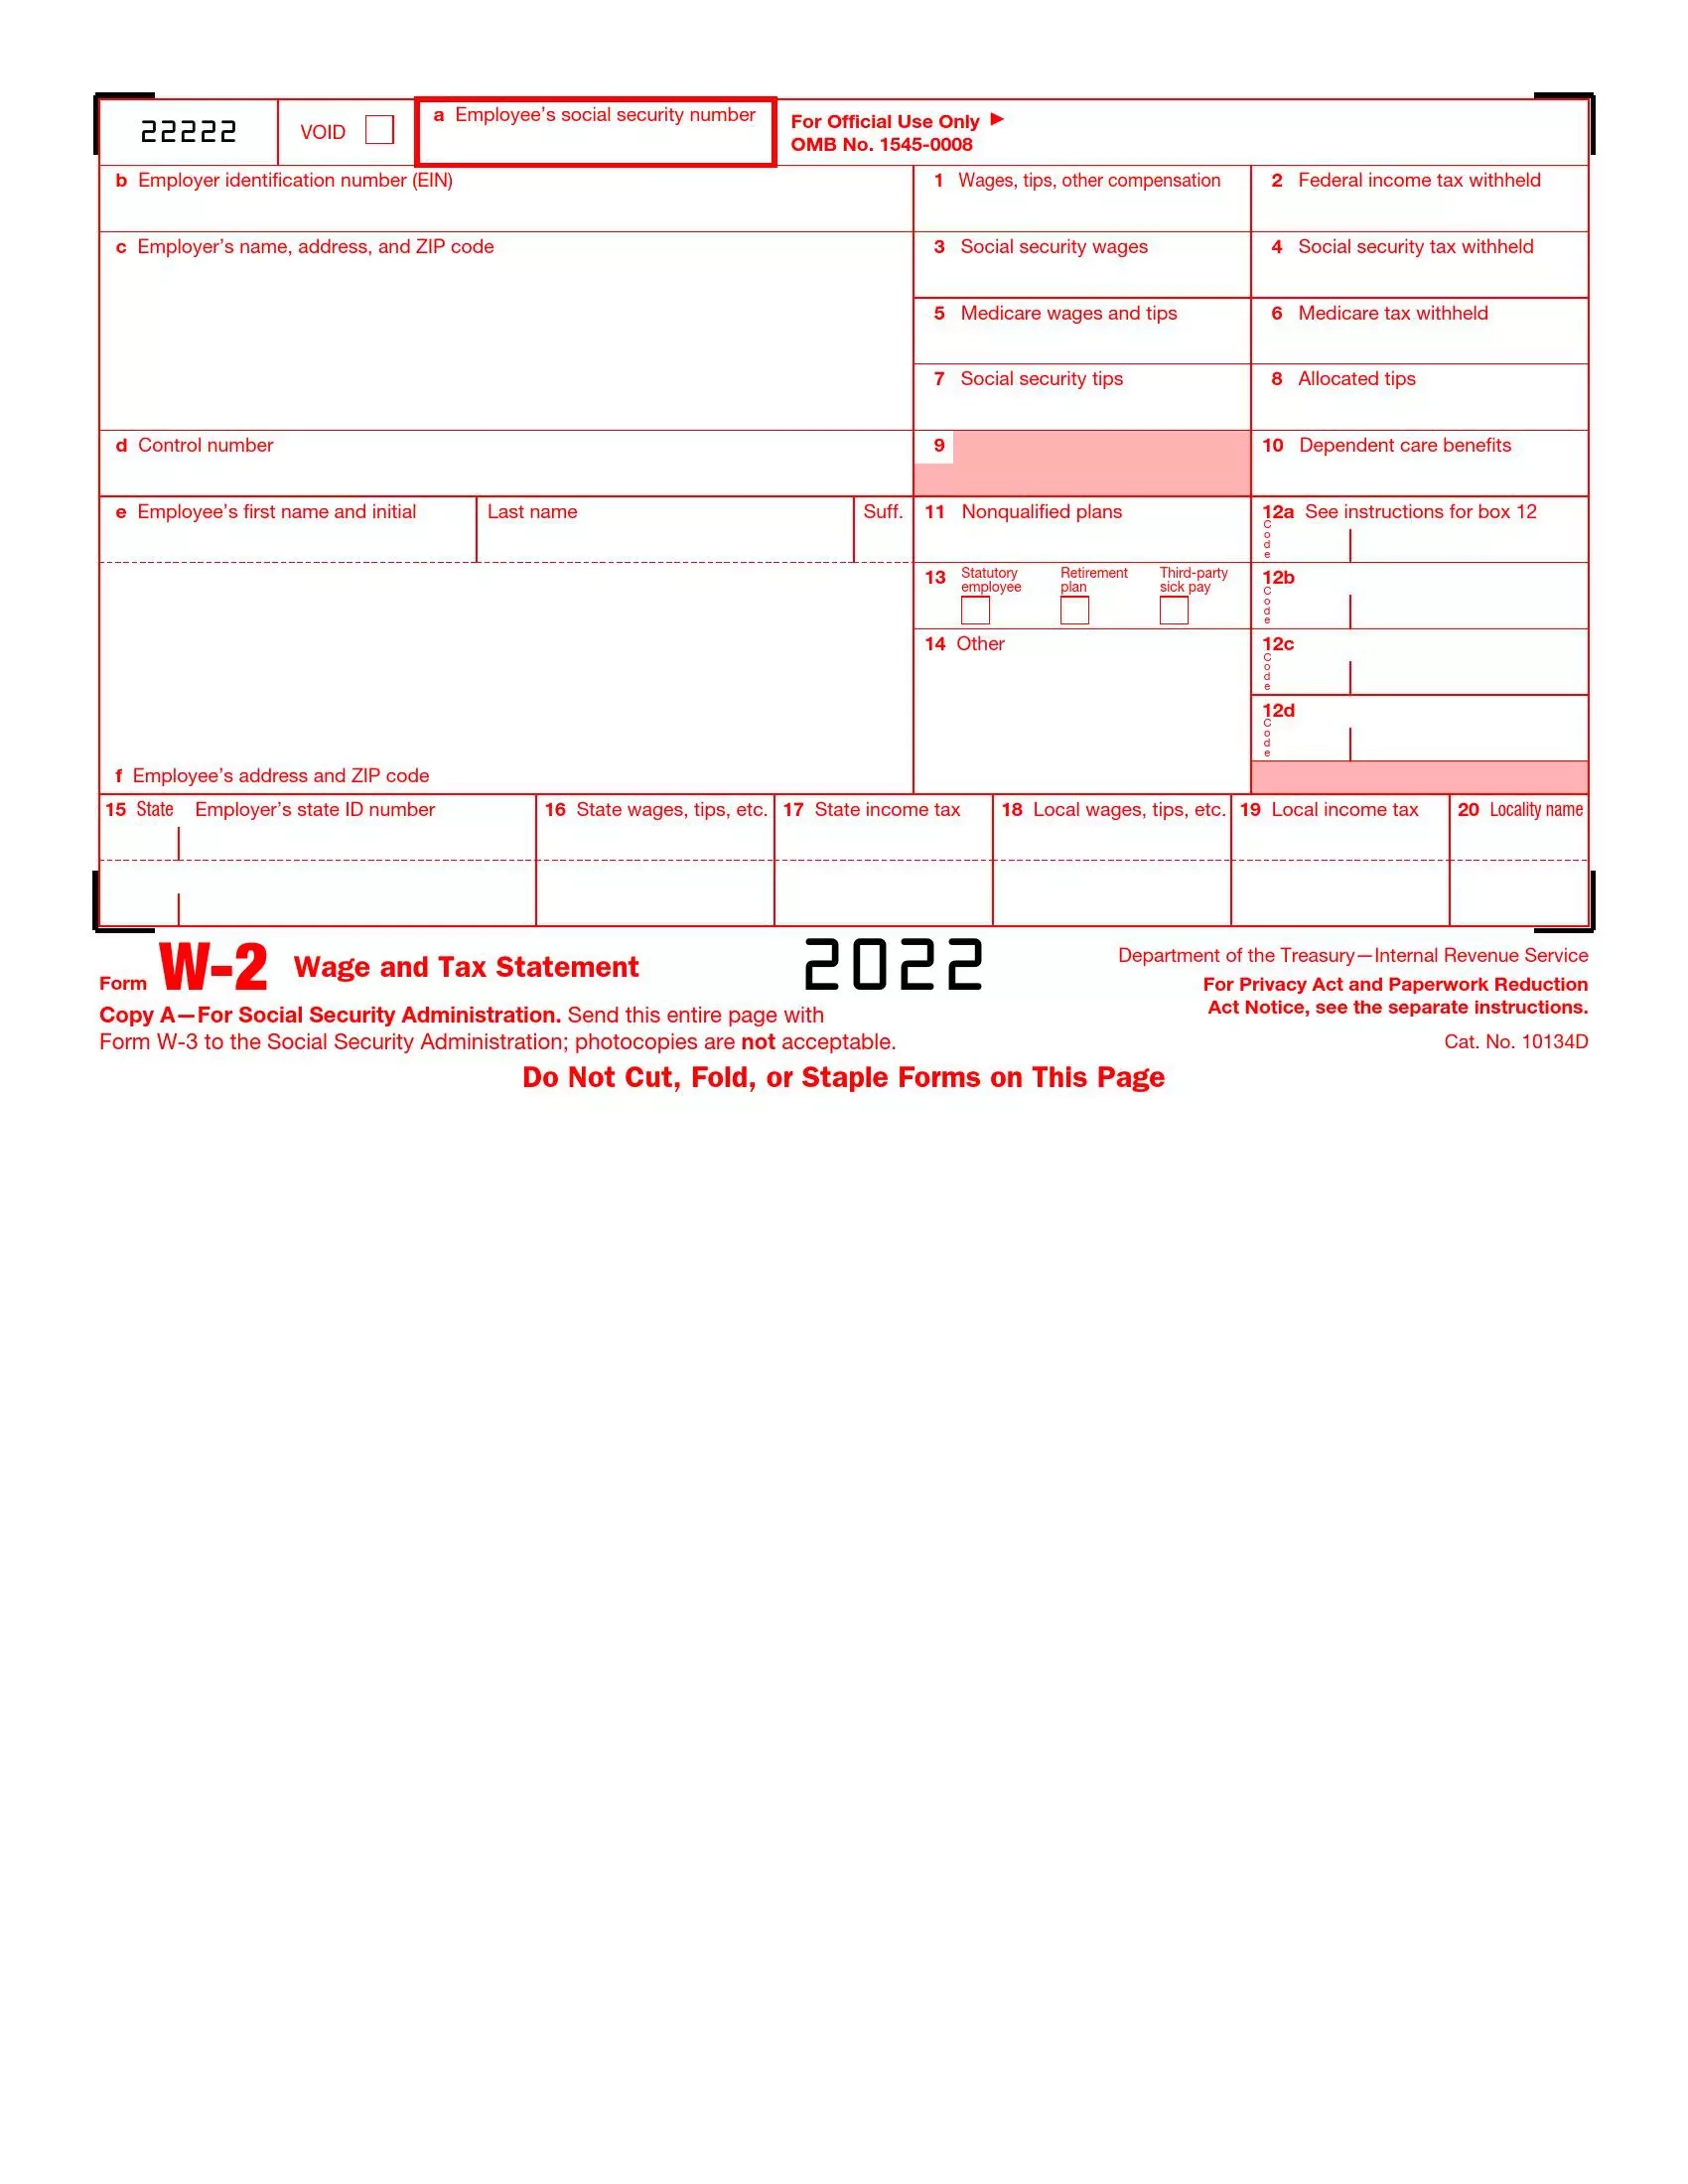 Irs Form W-2 ≡ Fill Out Printable Pdf Forms Online regarding Irs 2022 W2 Form Pdf